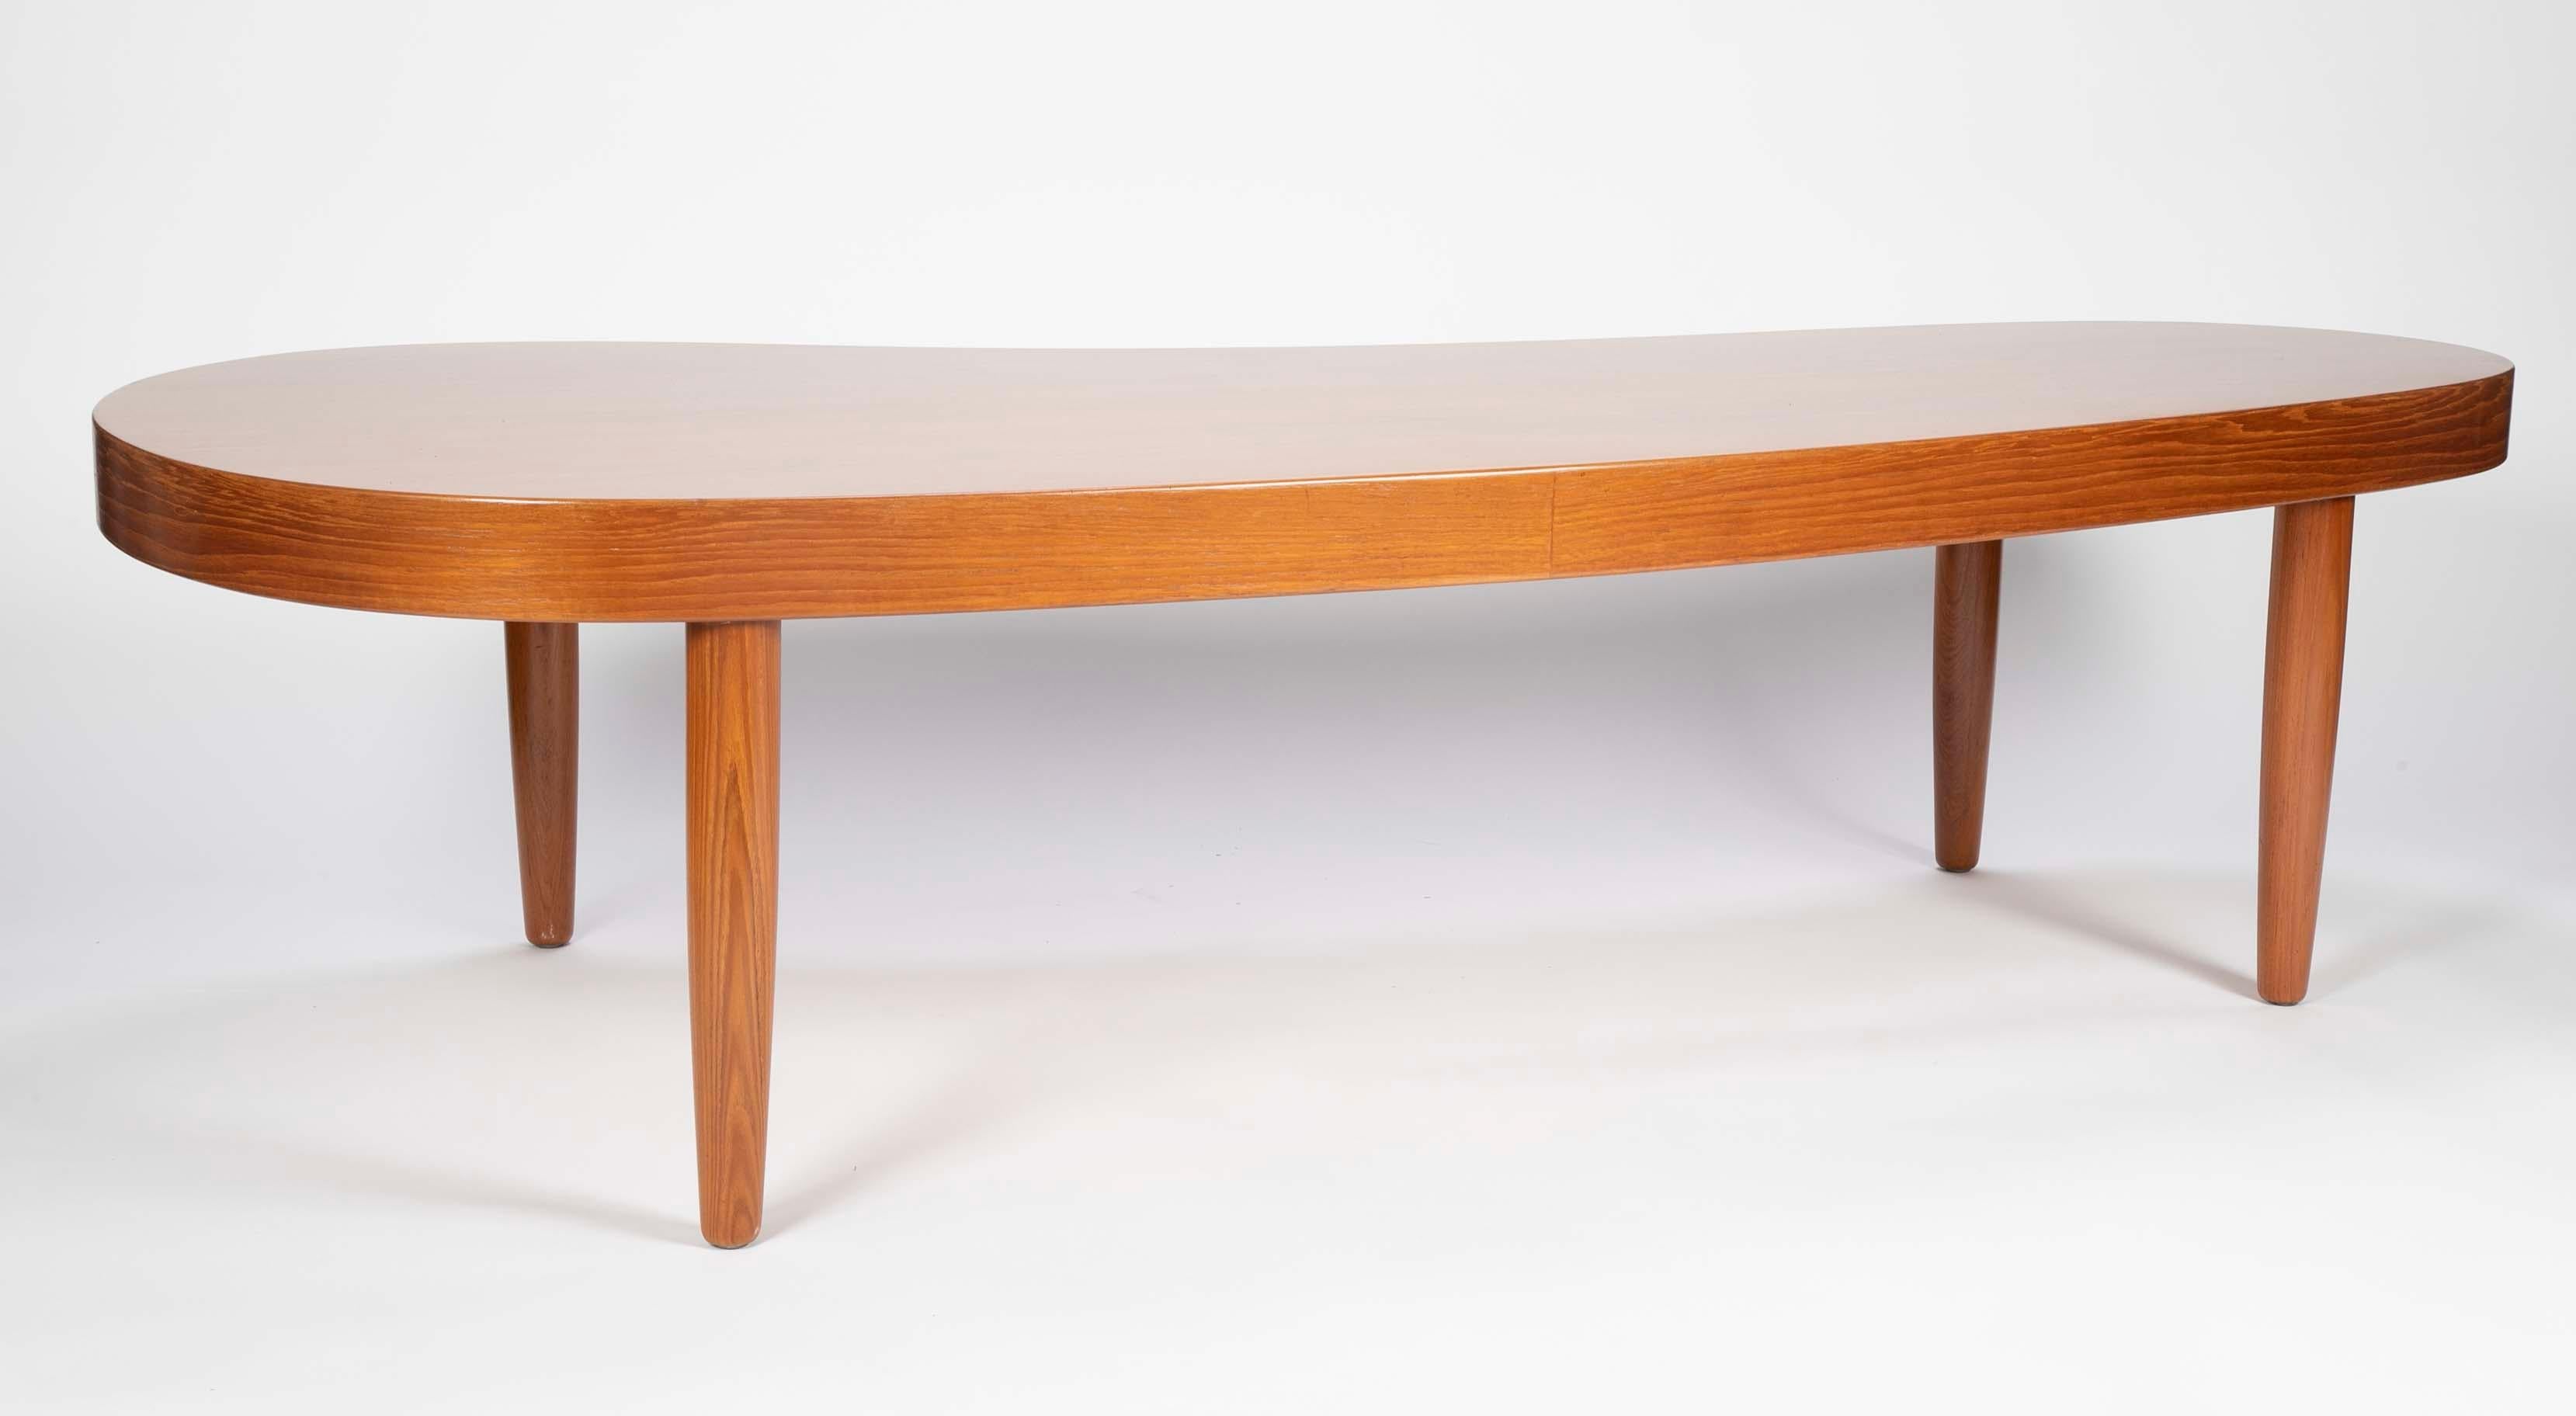 A midcentury Danish coffee table. Free-form design in teak. By repute purchased from Cristina Grajales Gallery, New York.
 